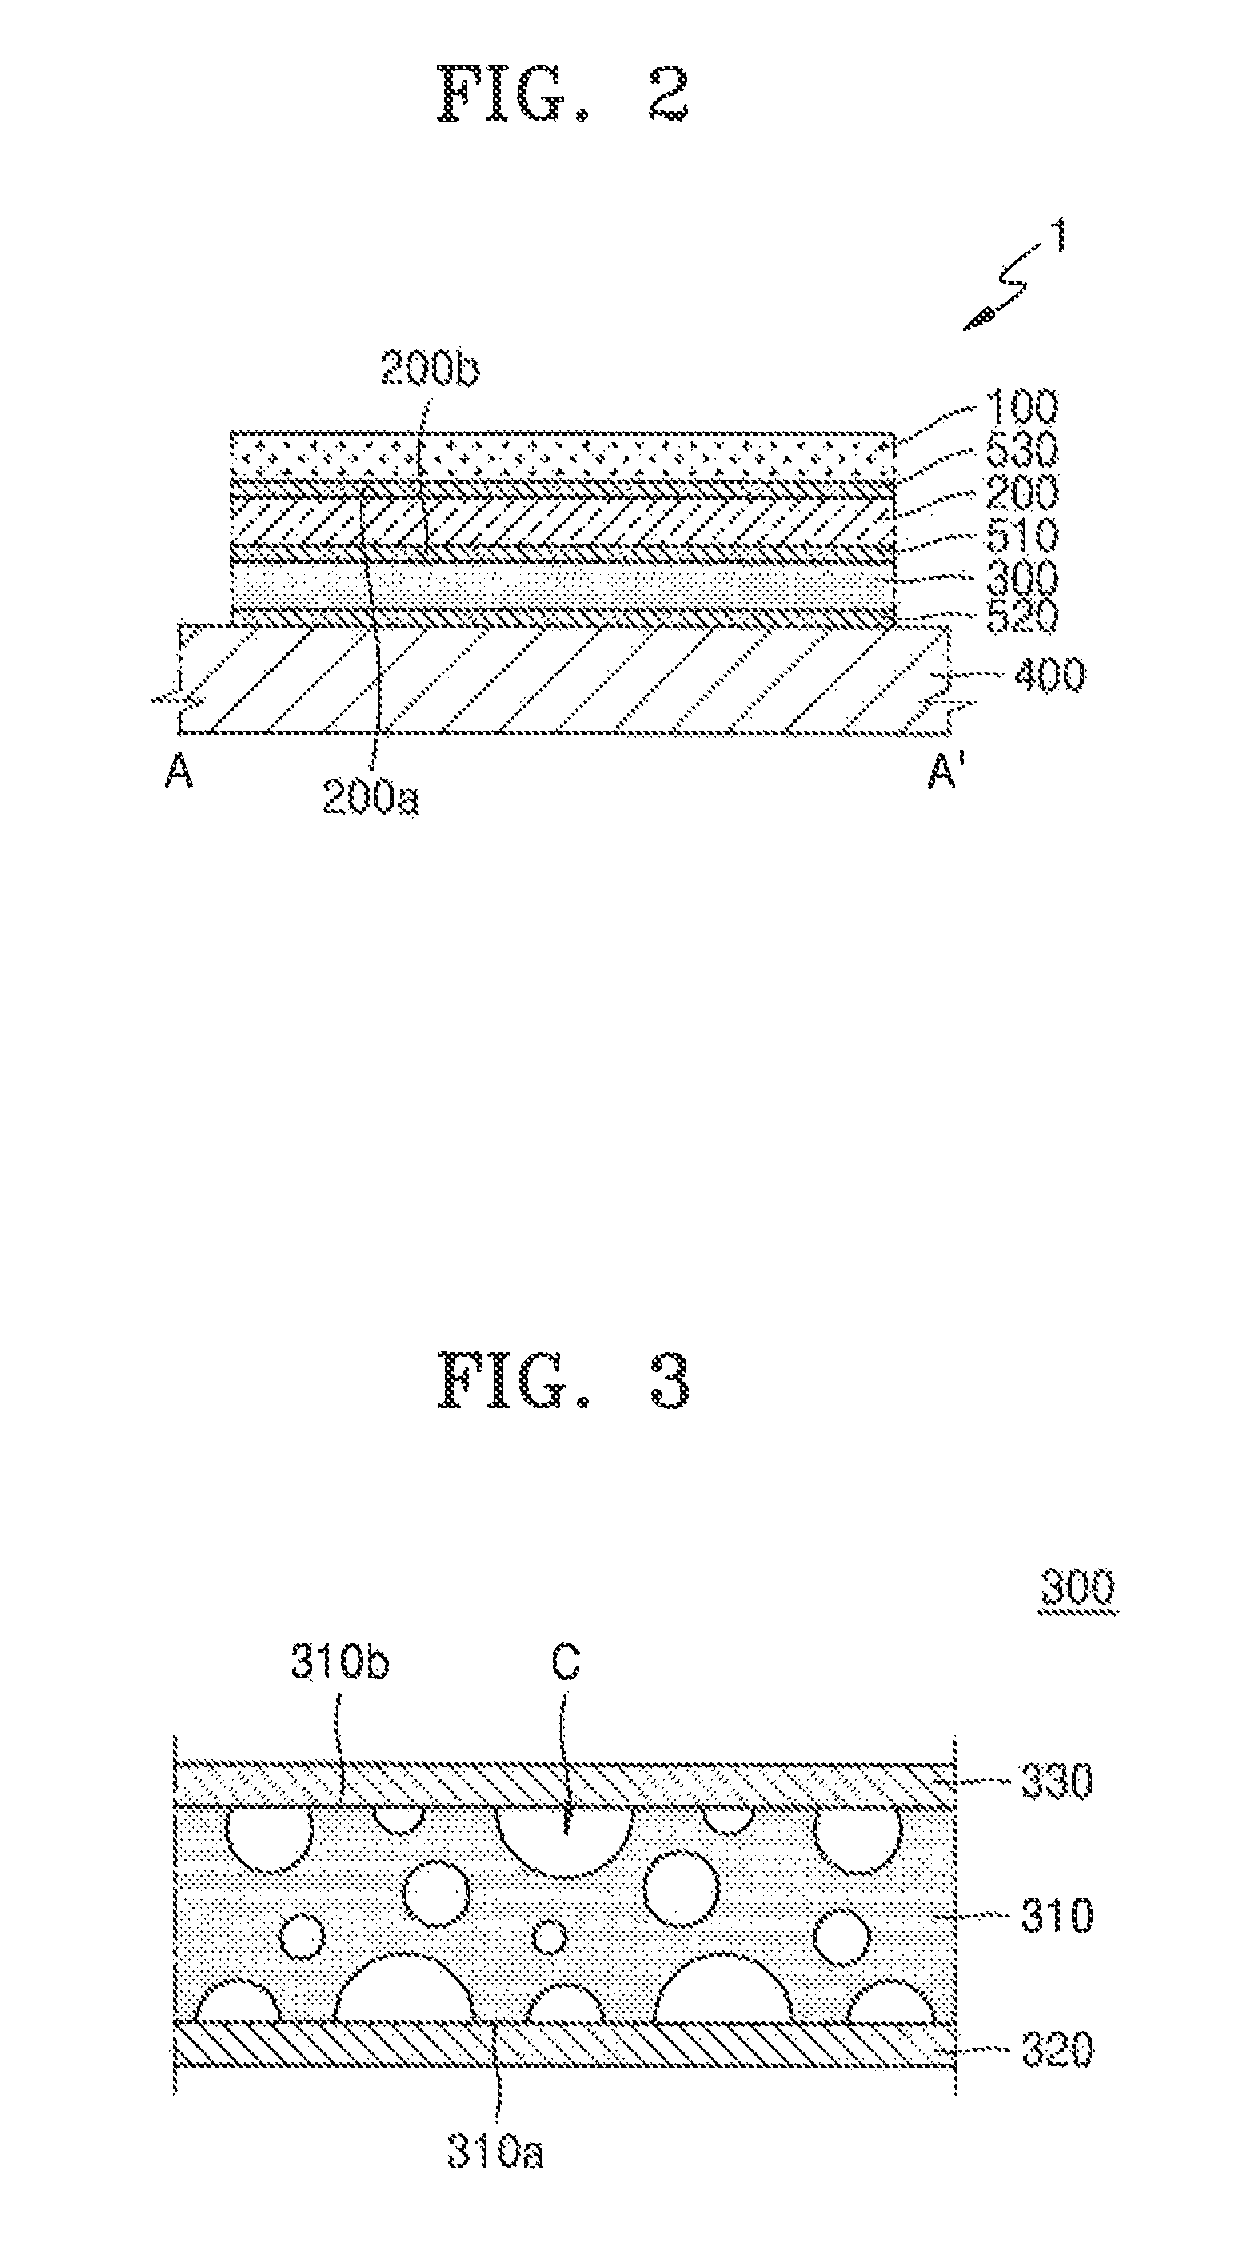 Display apparatus including a cushion unit and method of manufacturing the same